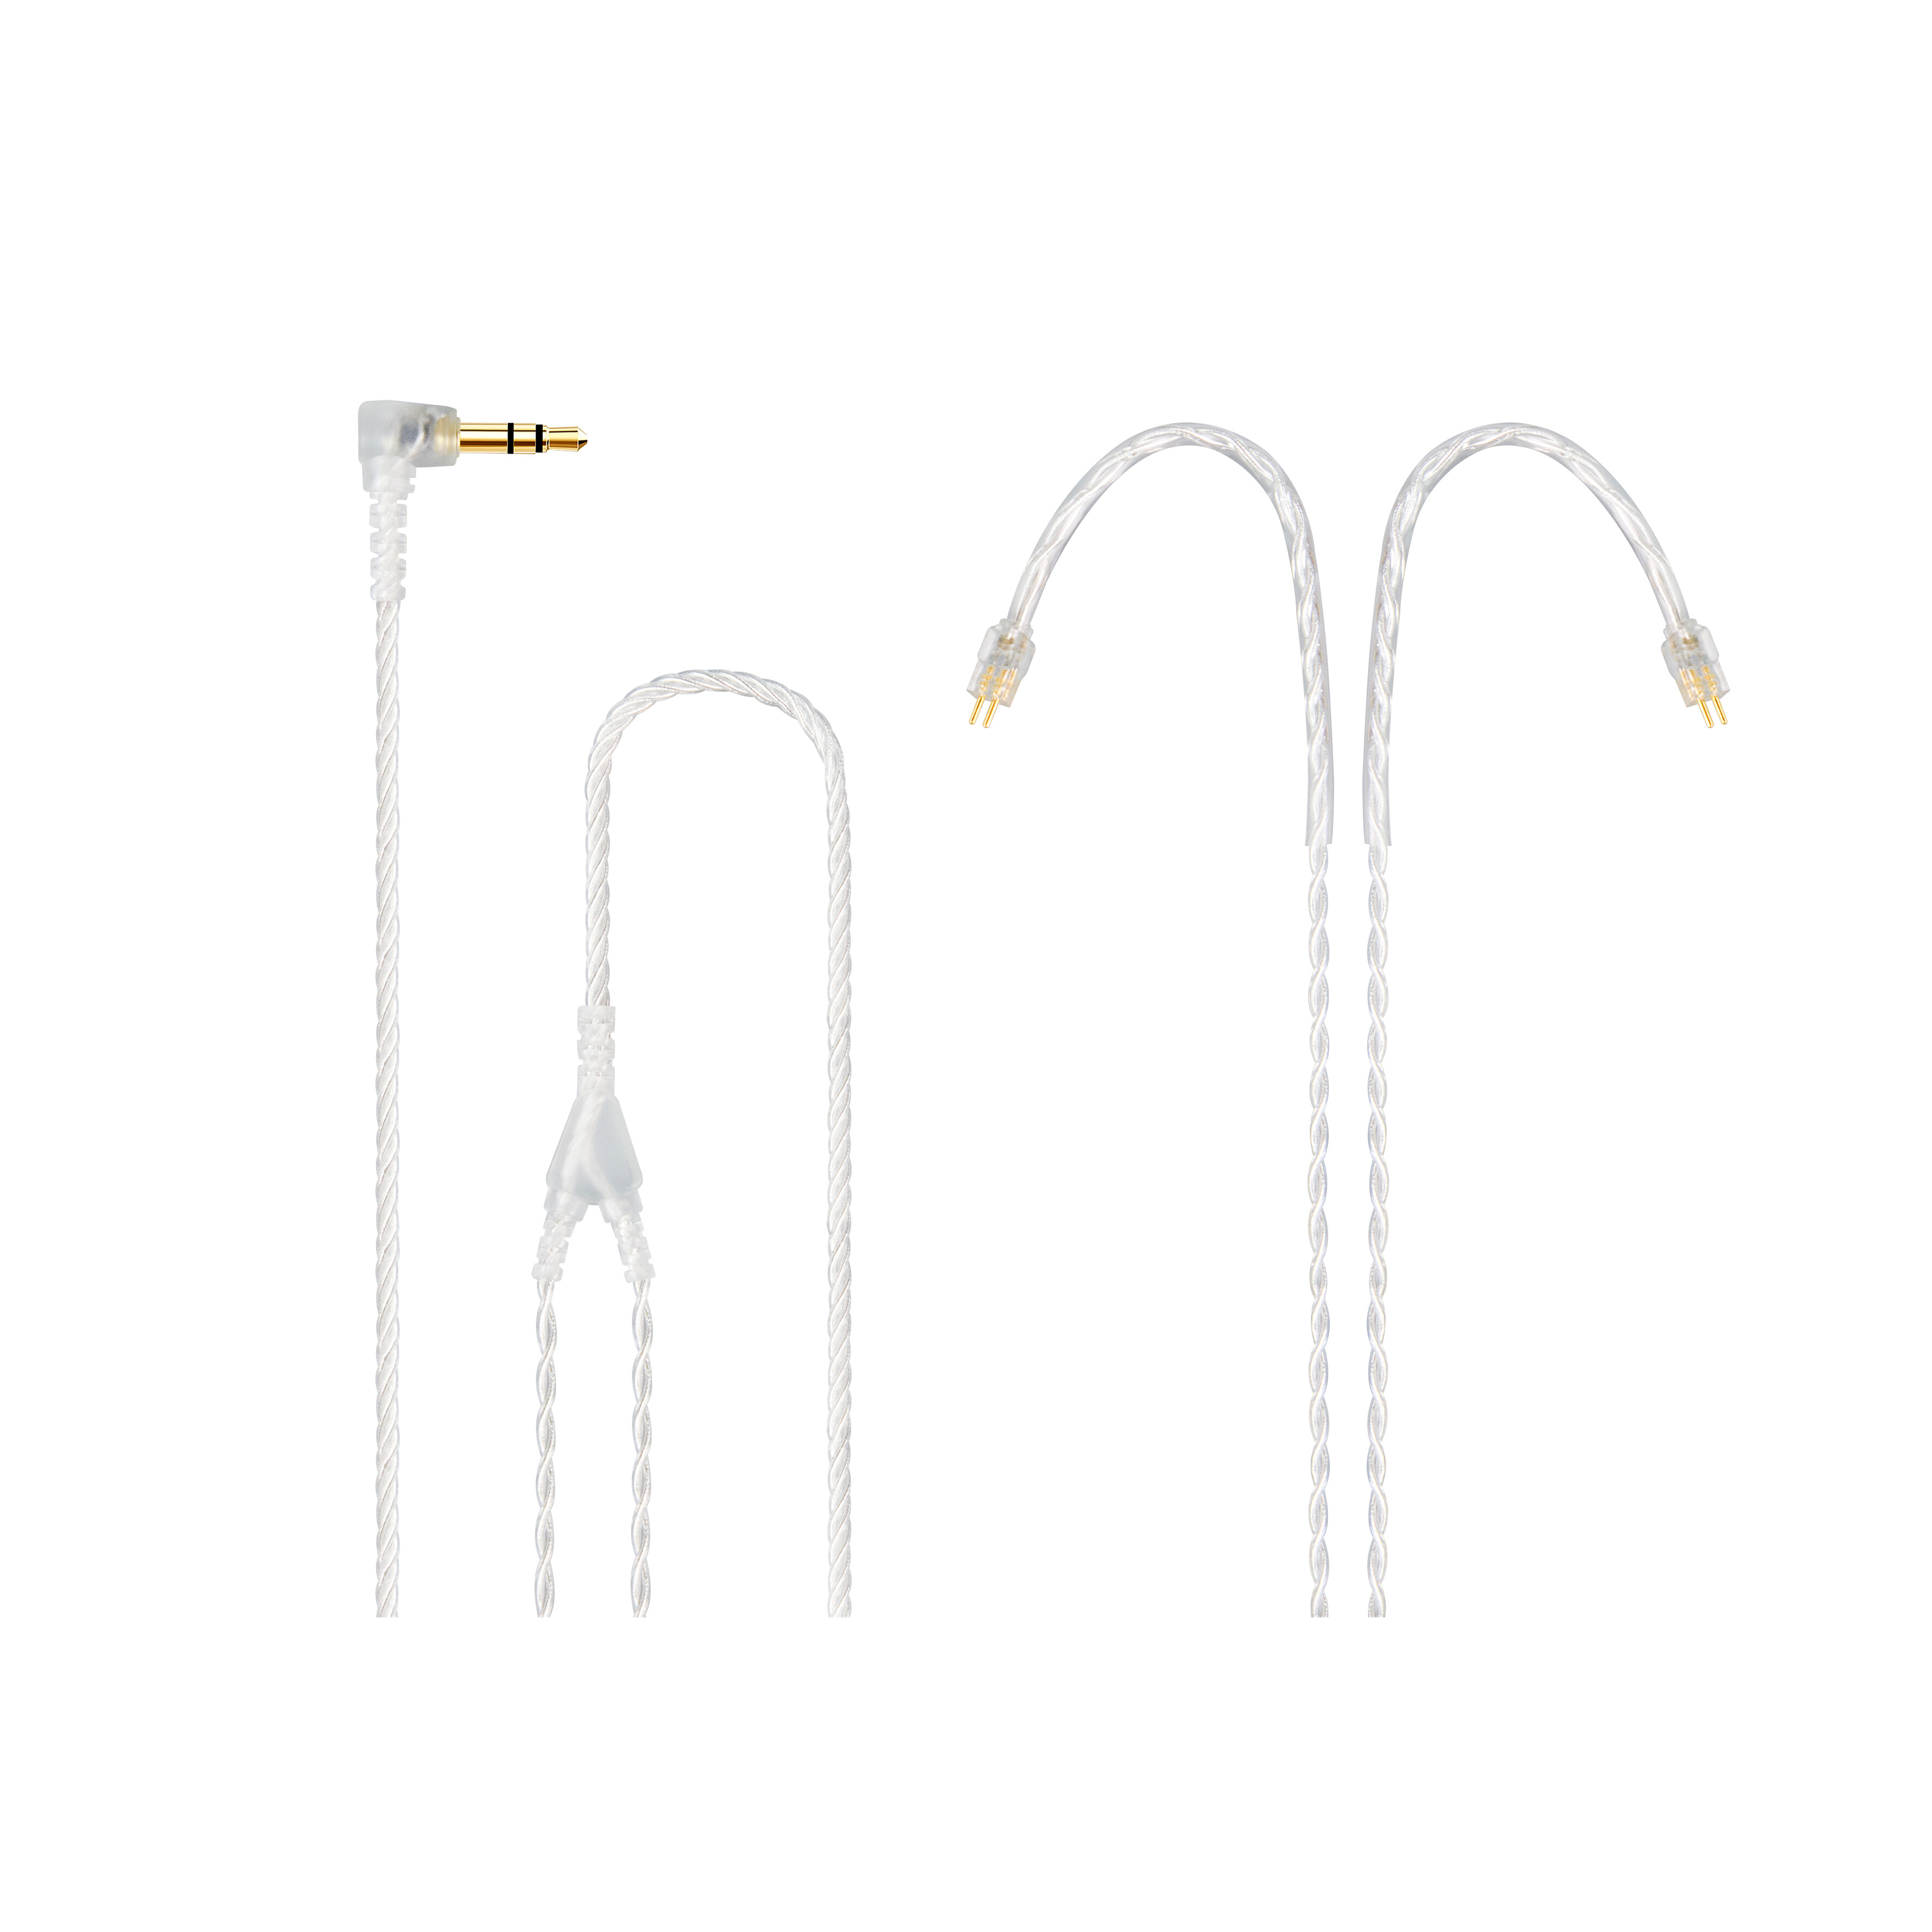 2 pin balanced iem cable, 2pin iem cable, two pin iem cable, 2 pin cable iem